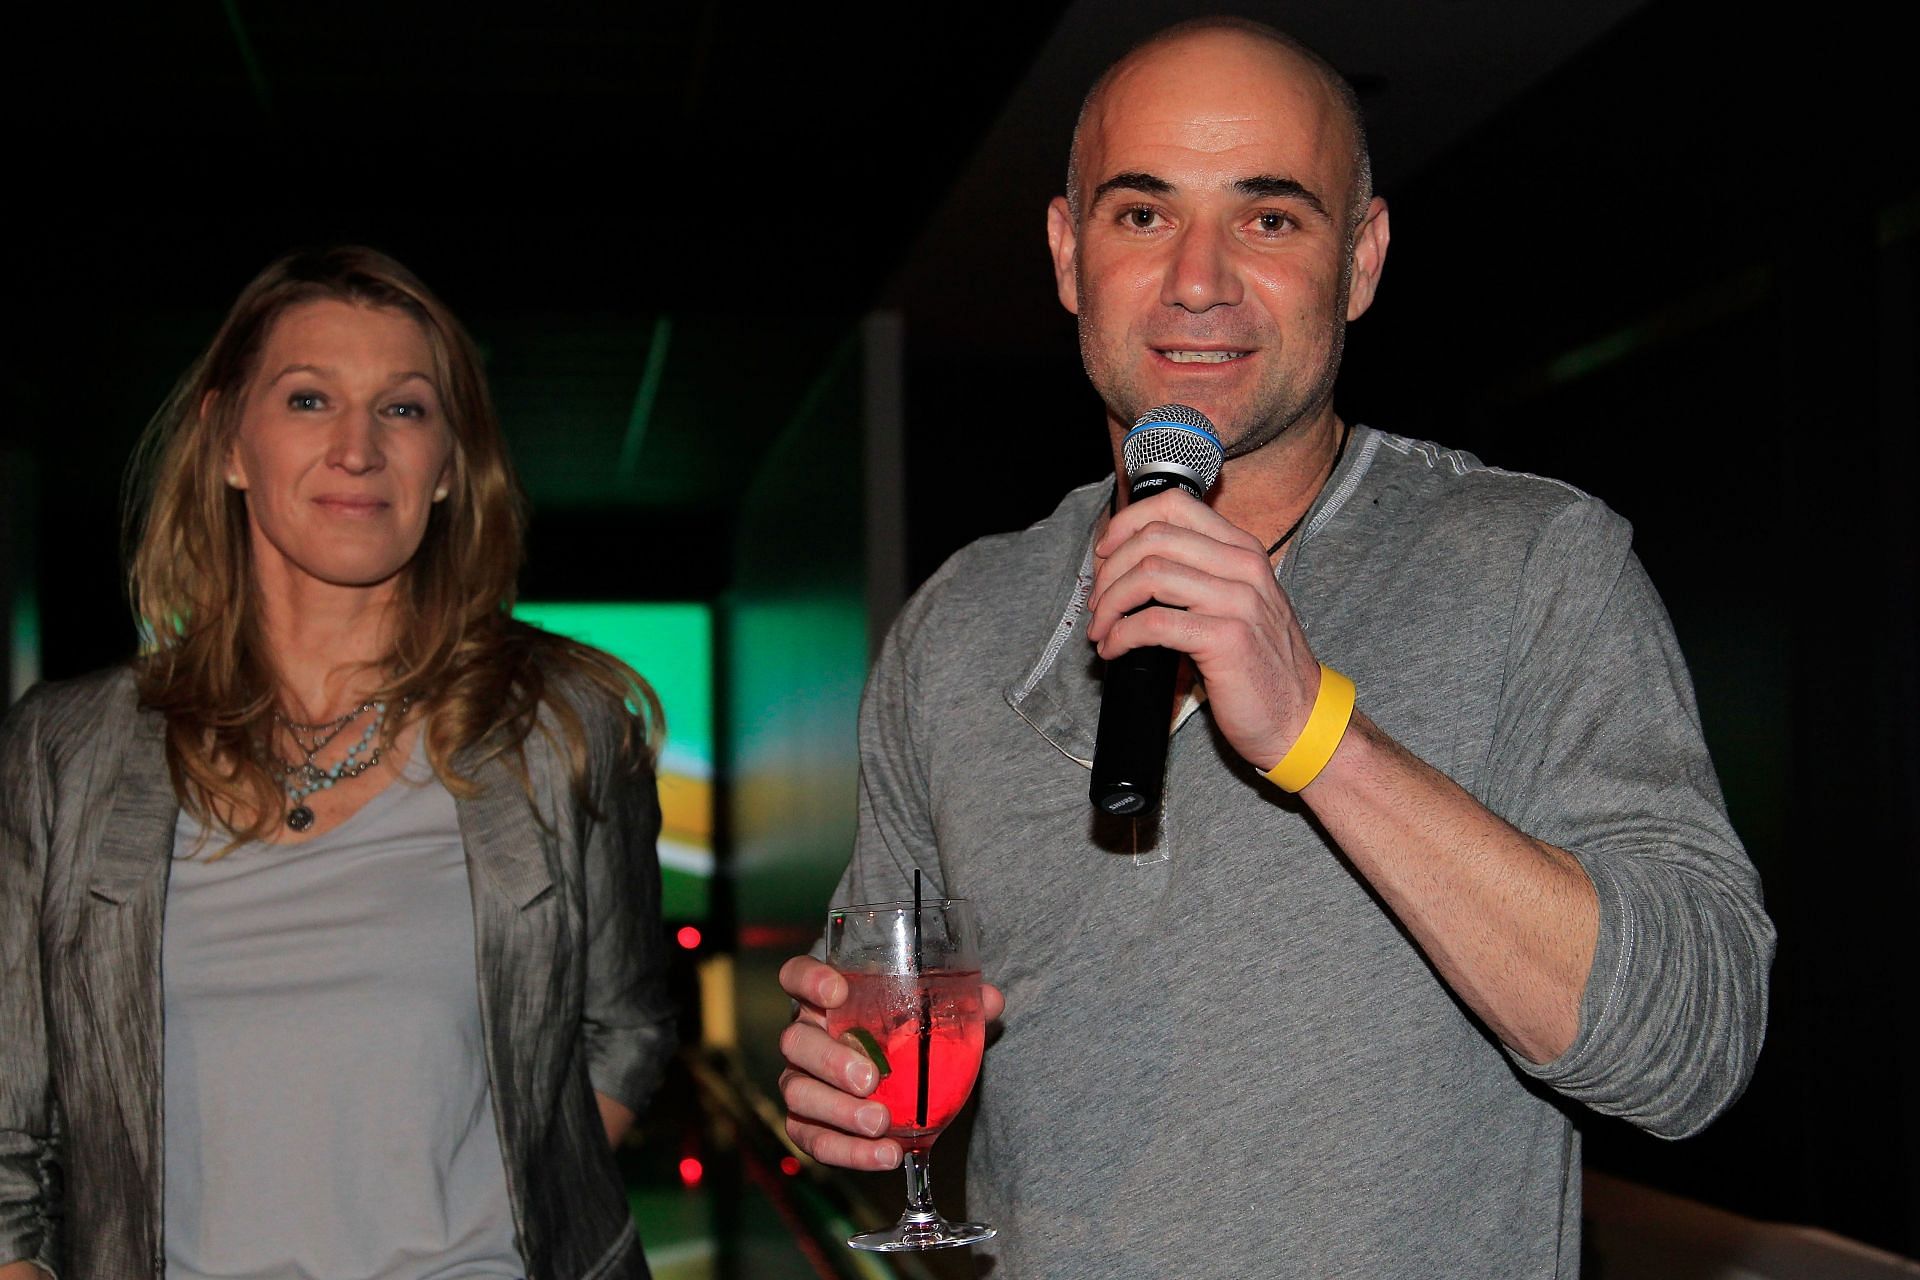 Andre Agassi and Steffi Graf in 2011